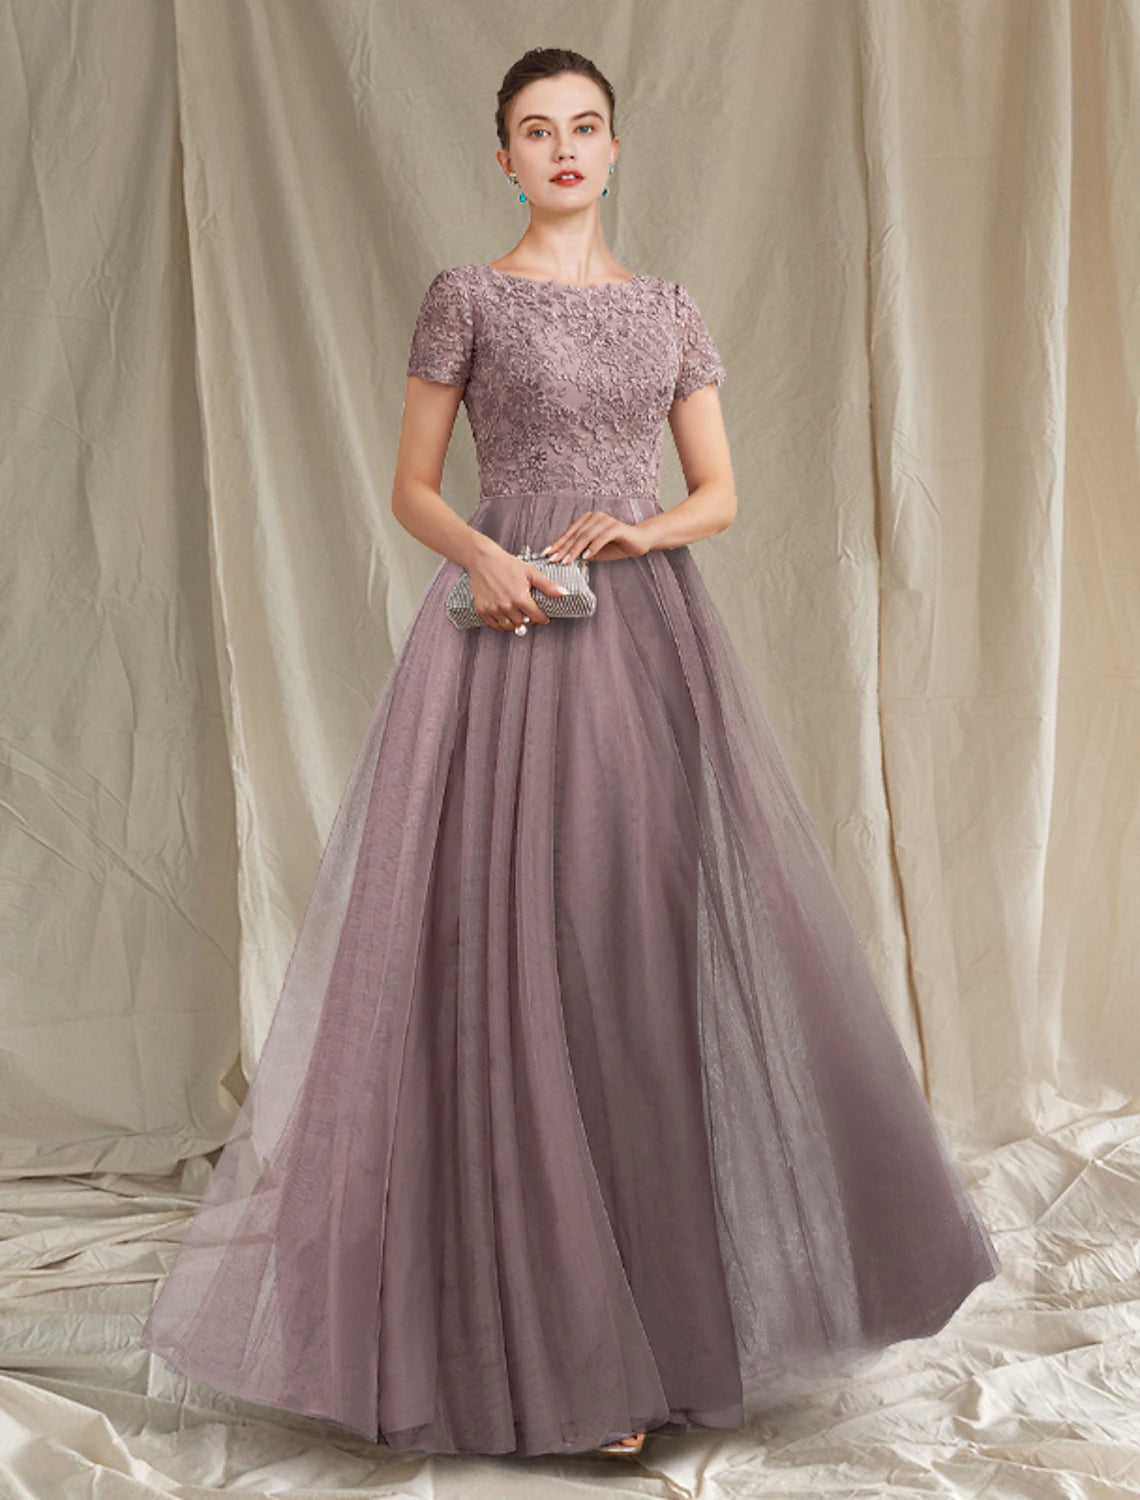 A-Line Mother of the Bride Dress Elegant Luxurious Jewel Neck Floor Length Lace Tulle Short Sleeve with Pleats Appliques